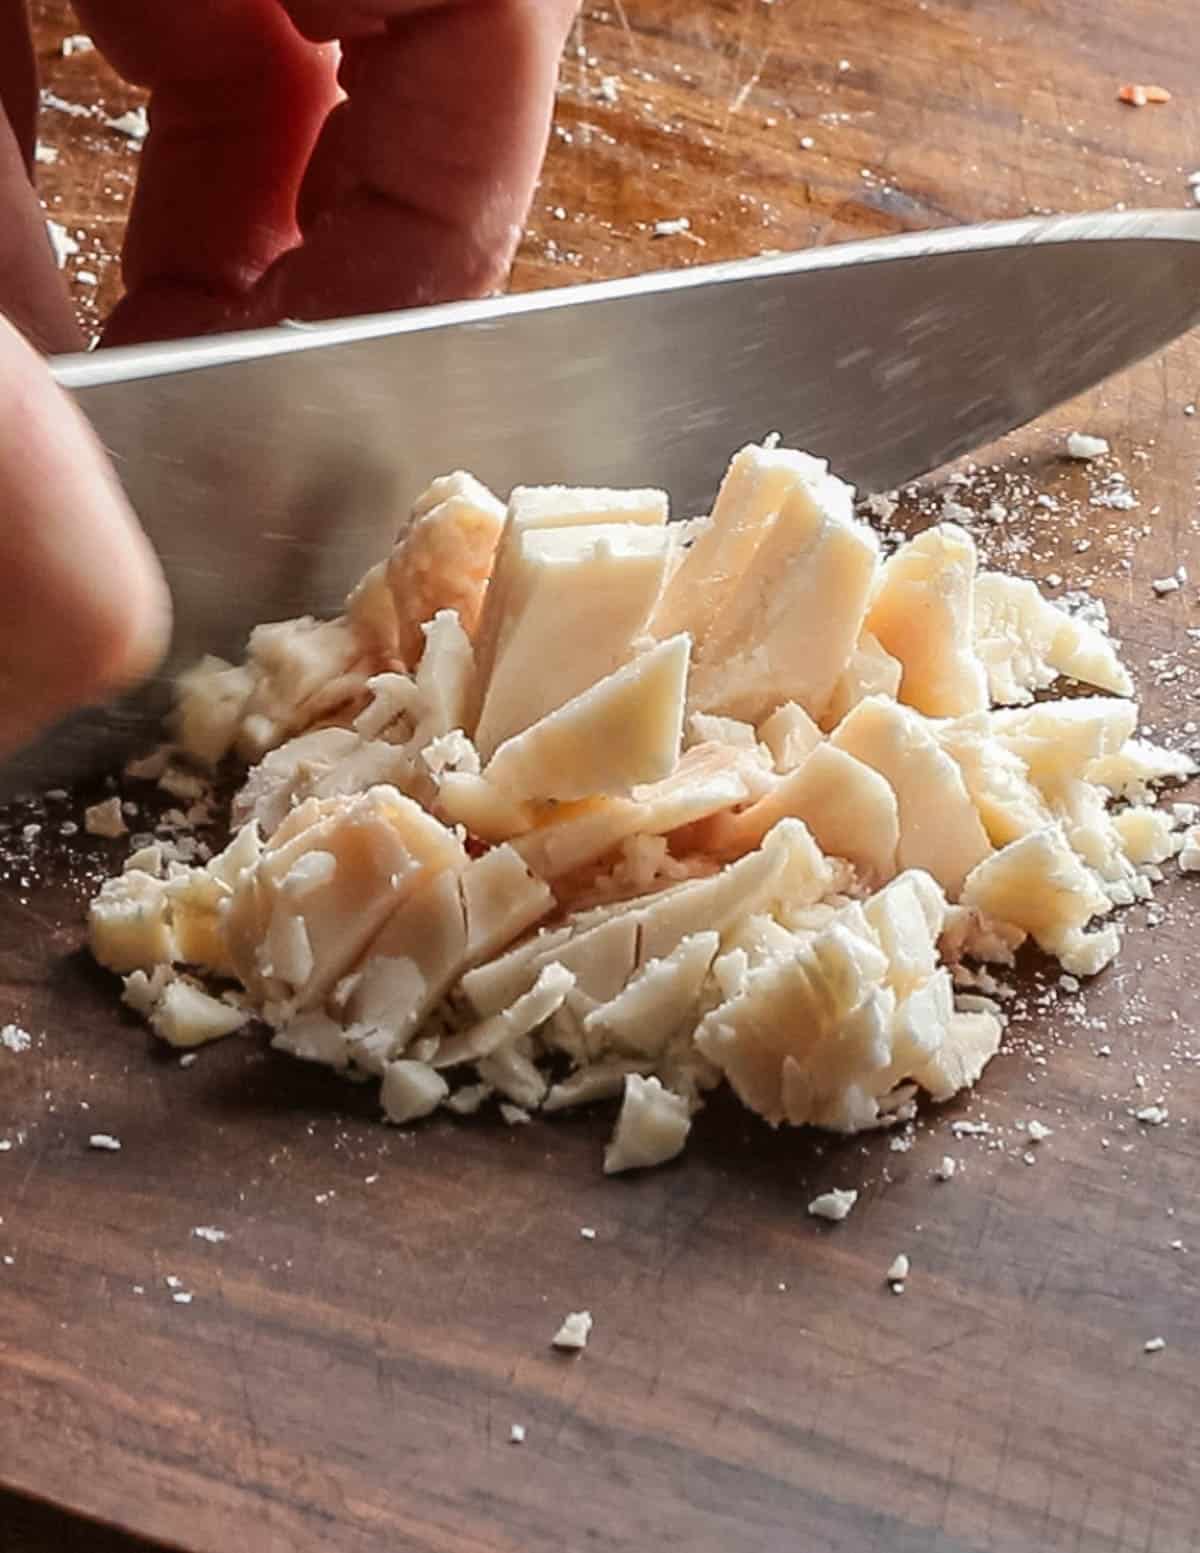 Cutting suet beef into small pieces for rendering tallow. 